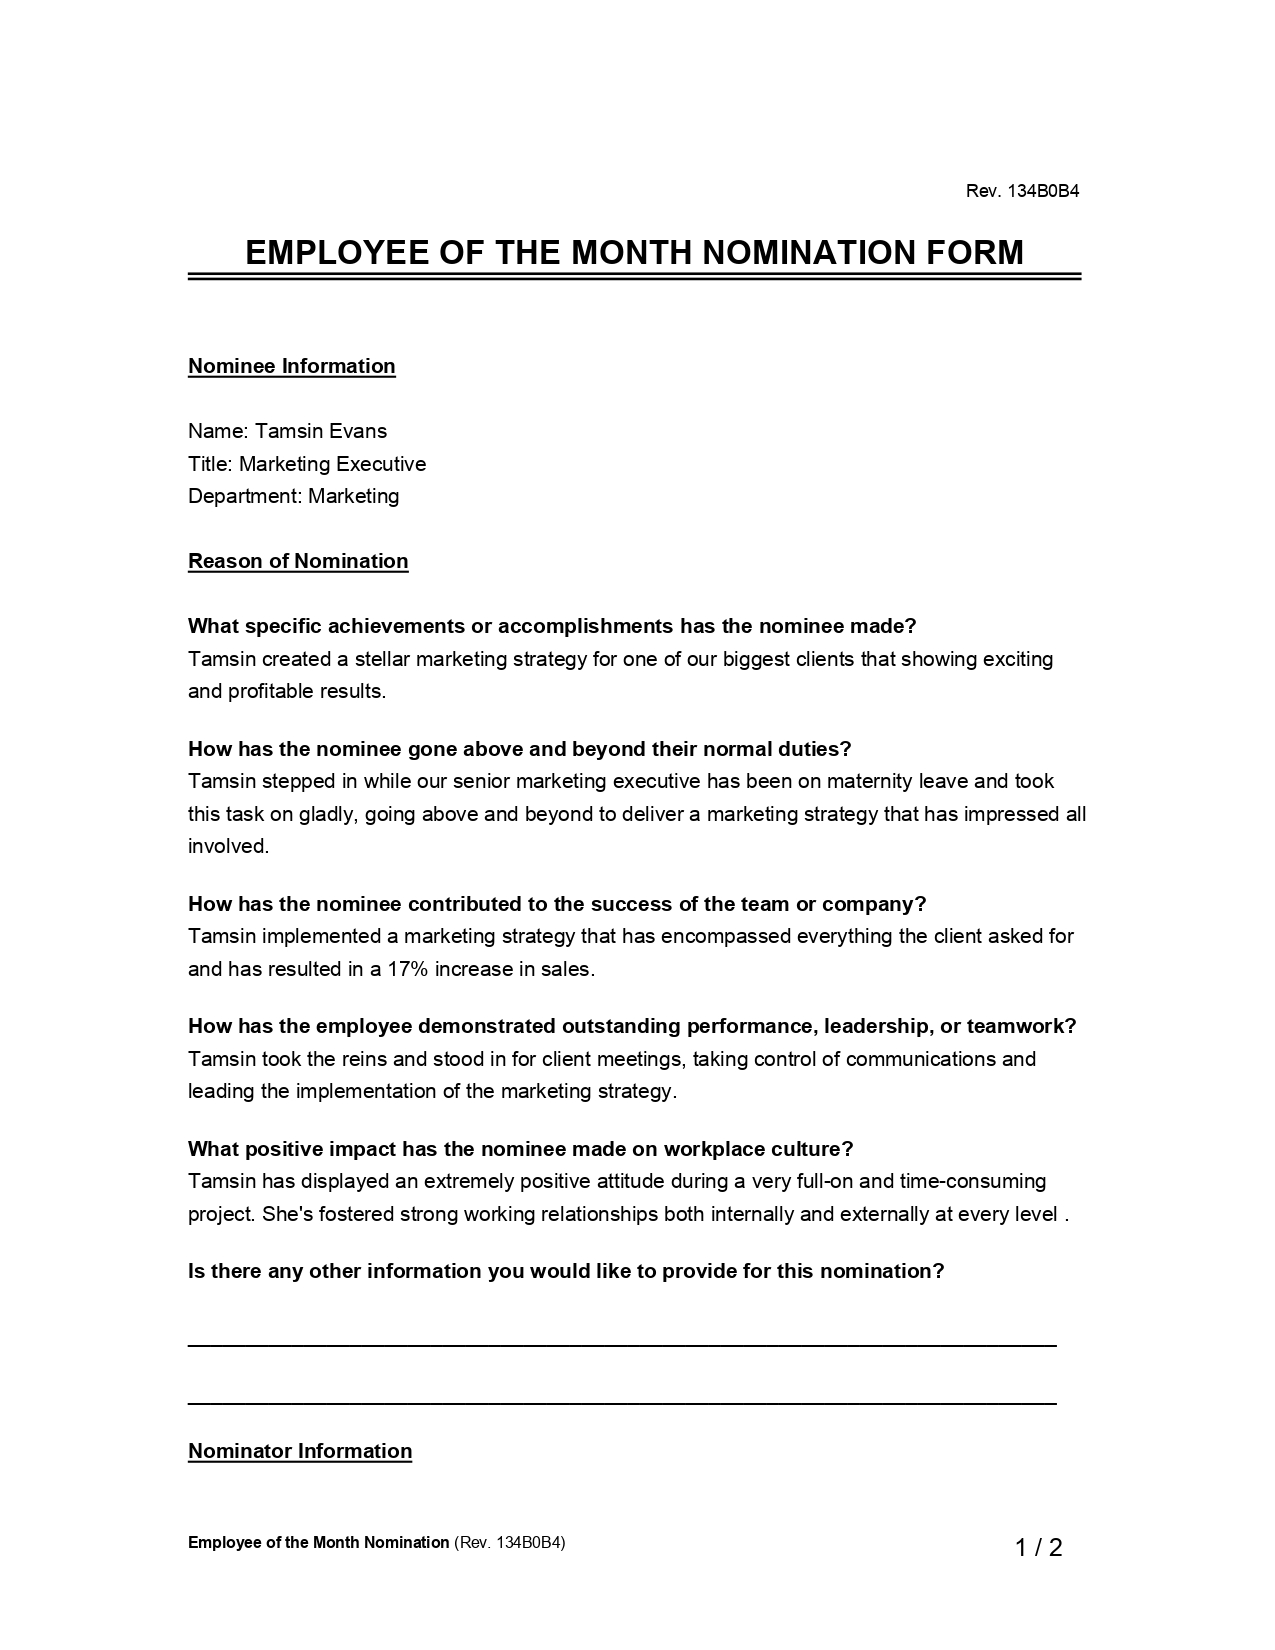 Employee of the month nomination form example